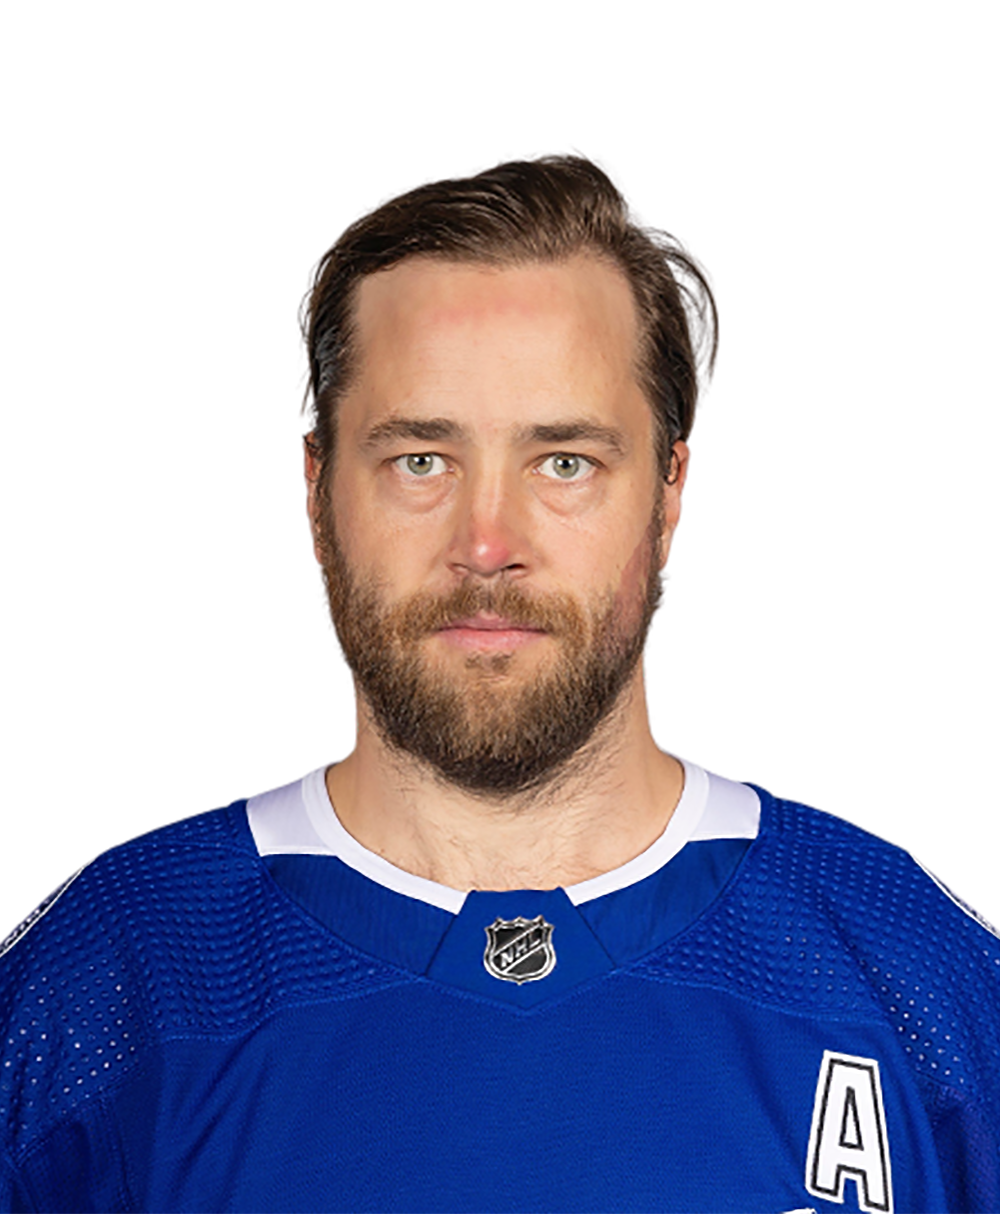 Big changes for Victor Hedman in Game 6 - HockeyFeed